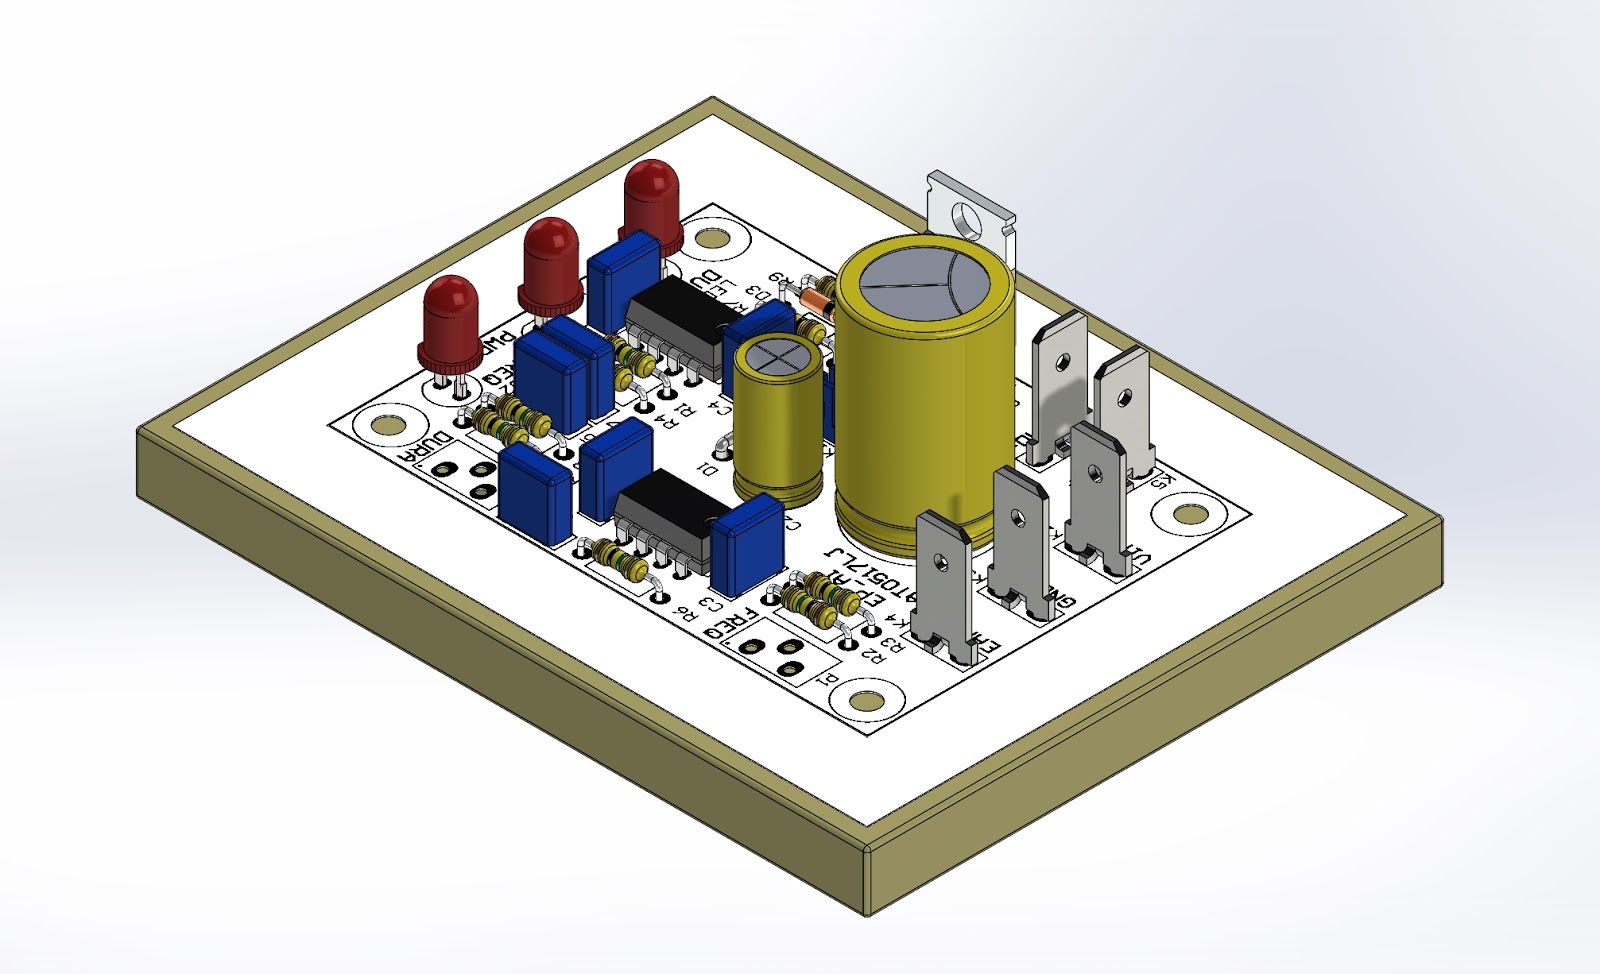 A 3D view of a through hole (THT) PCB for an audio amplifier.